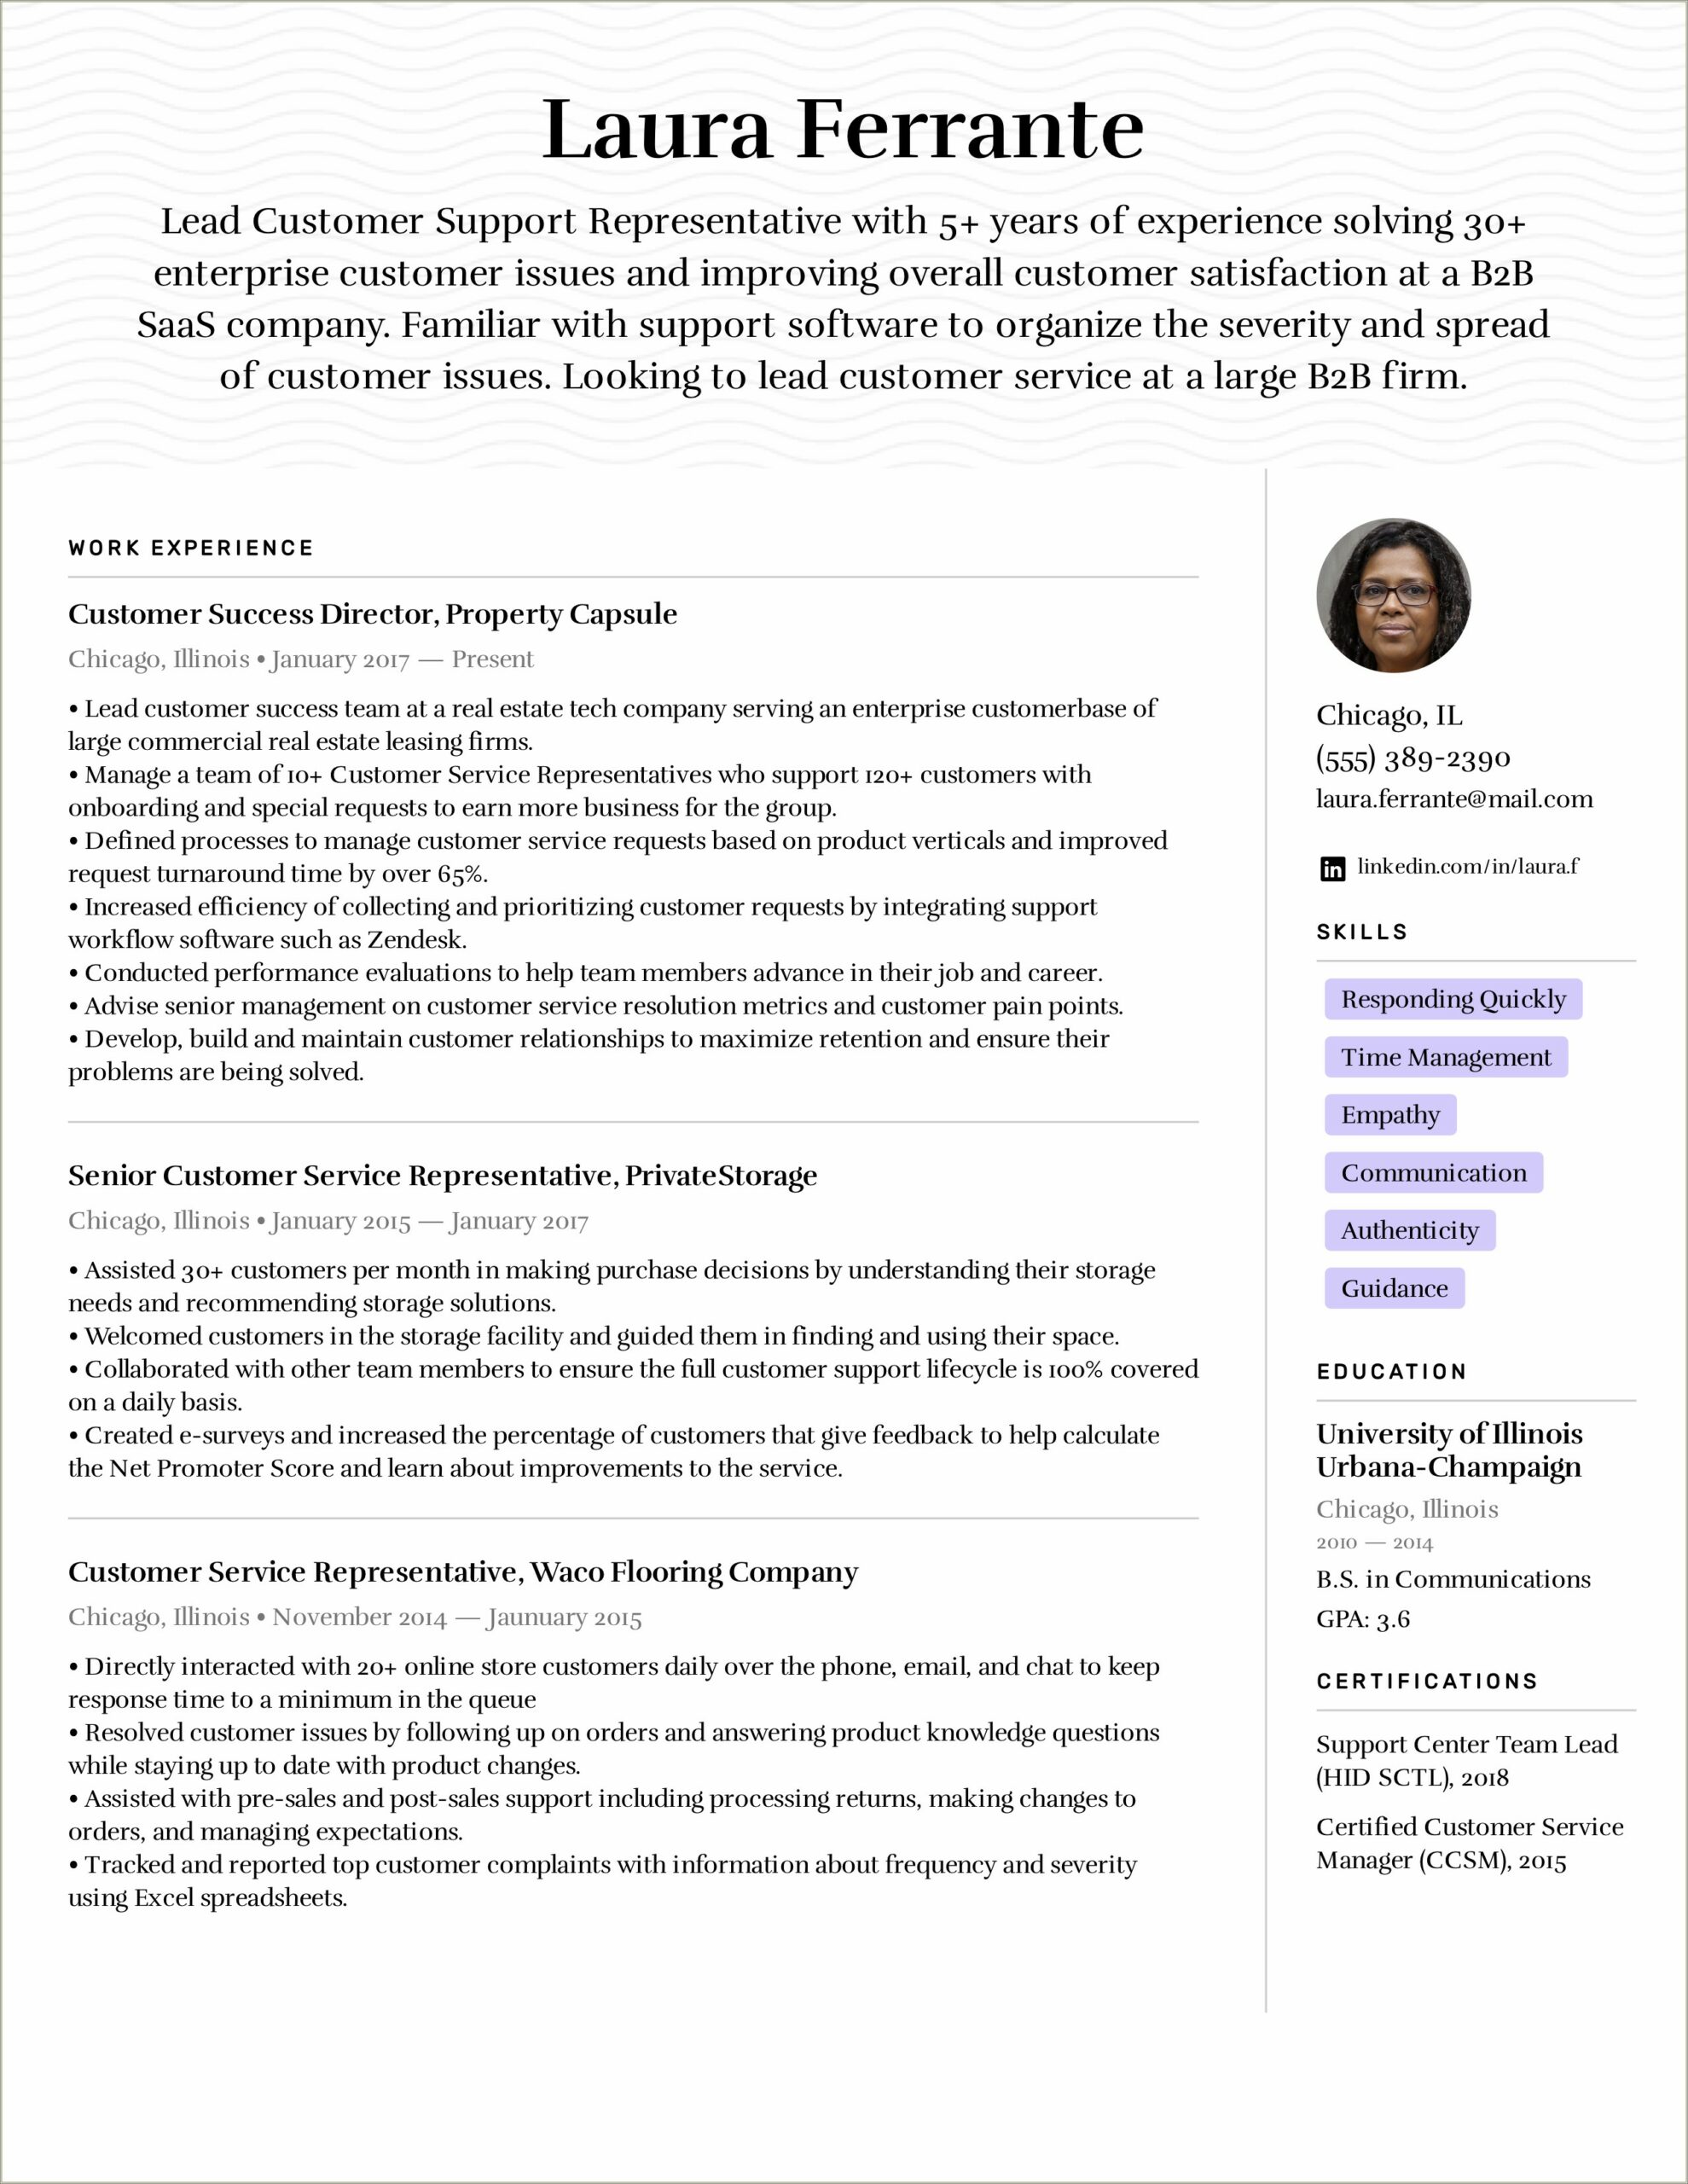 Resume Skills And Abilities List Examples